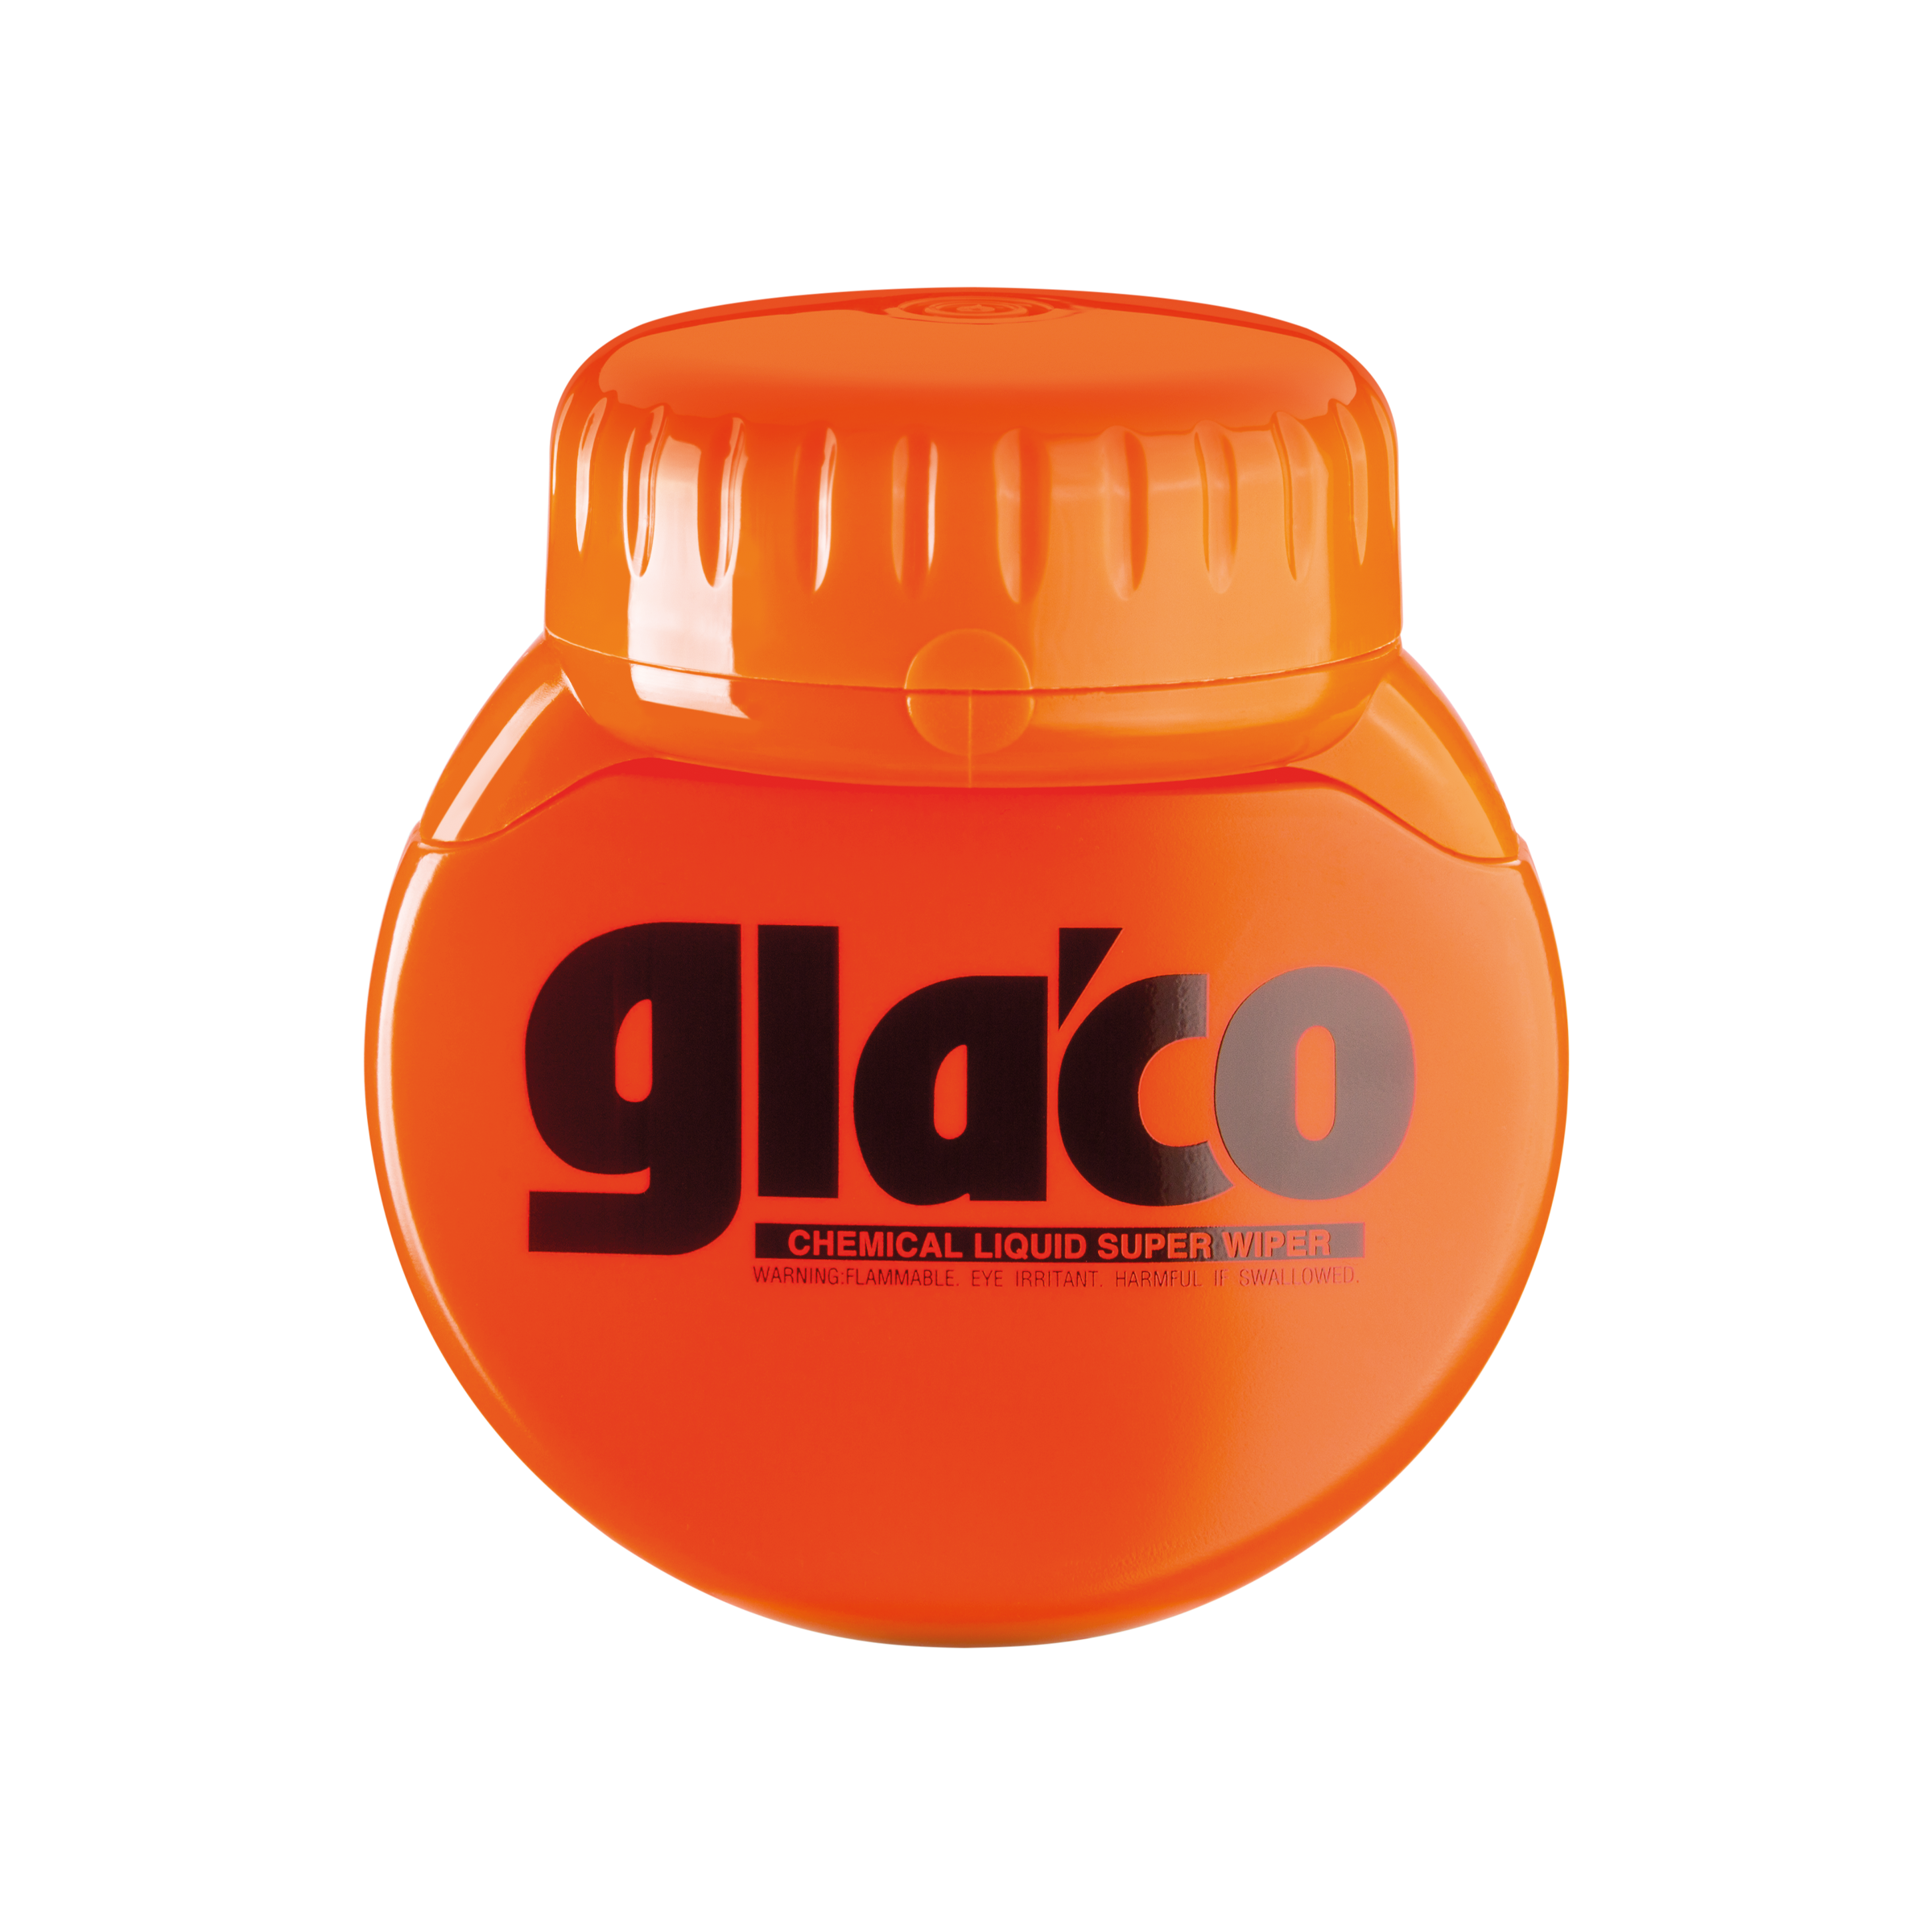 Nettoyages Autos Services - SOFT99 GLACO ULTRA 70ml